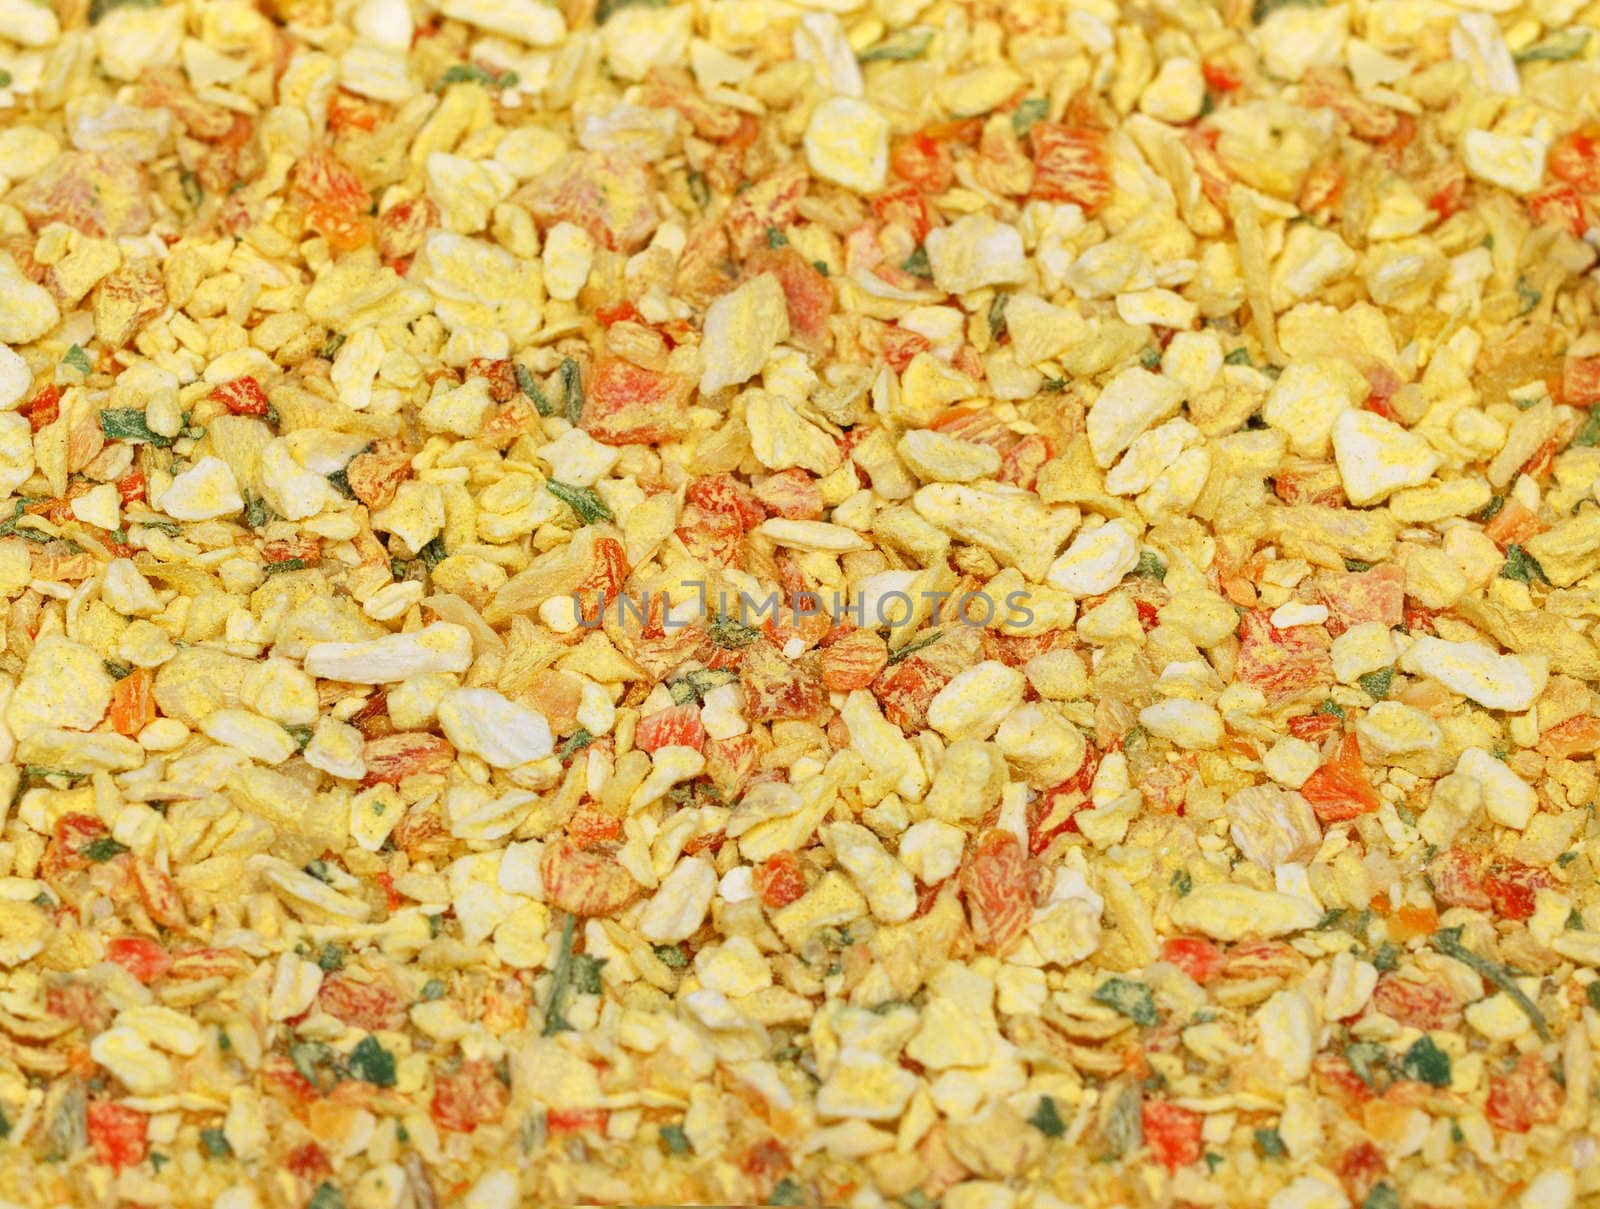 Close-up of ground mixed dry spices.